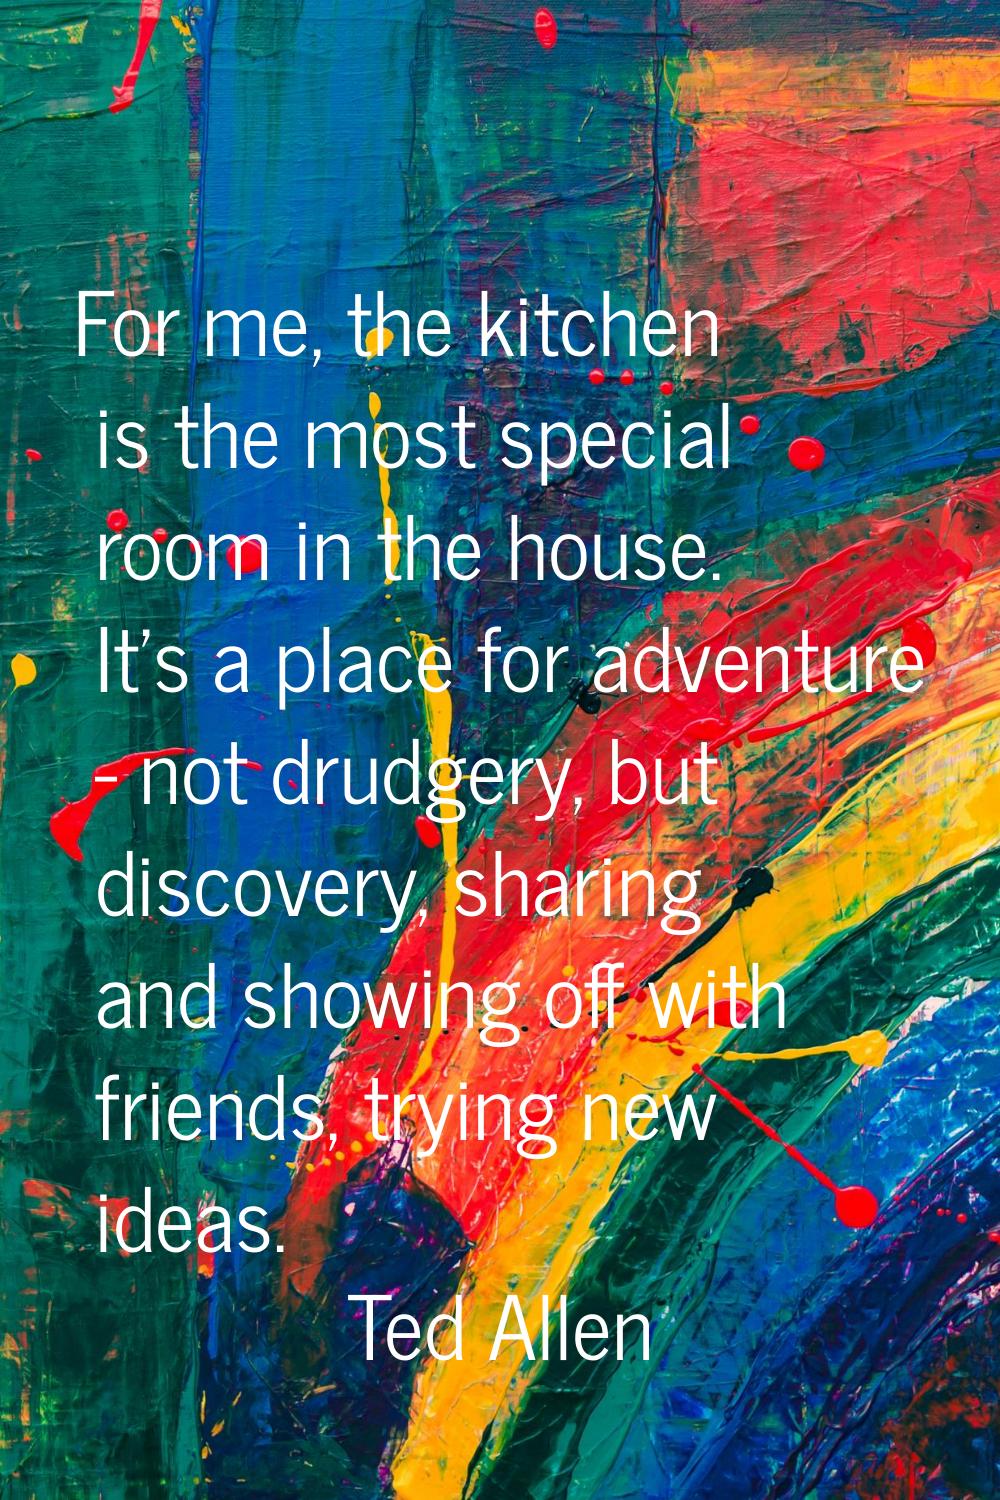 For me, the kitchen is the most special room in the house. It's a place for adventure - not drudger